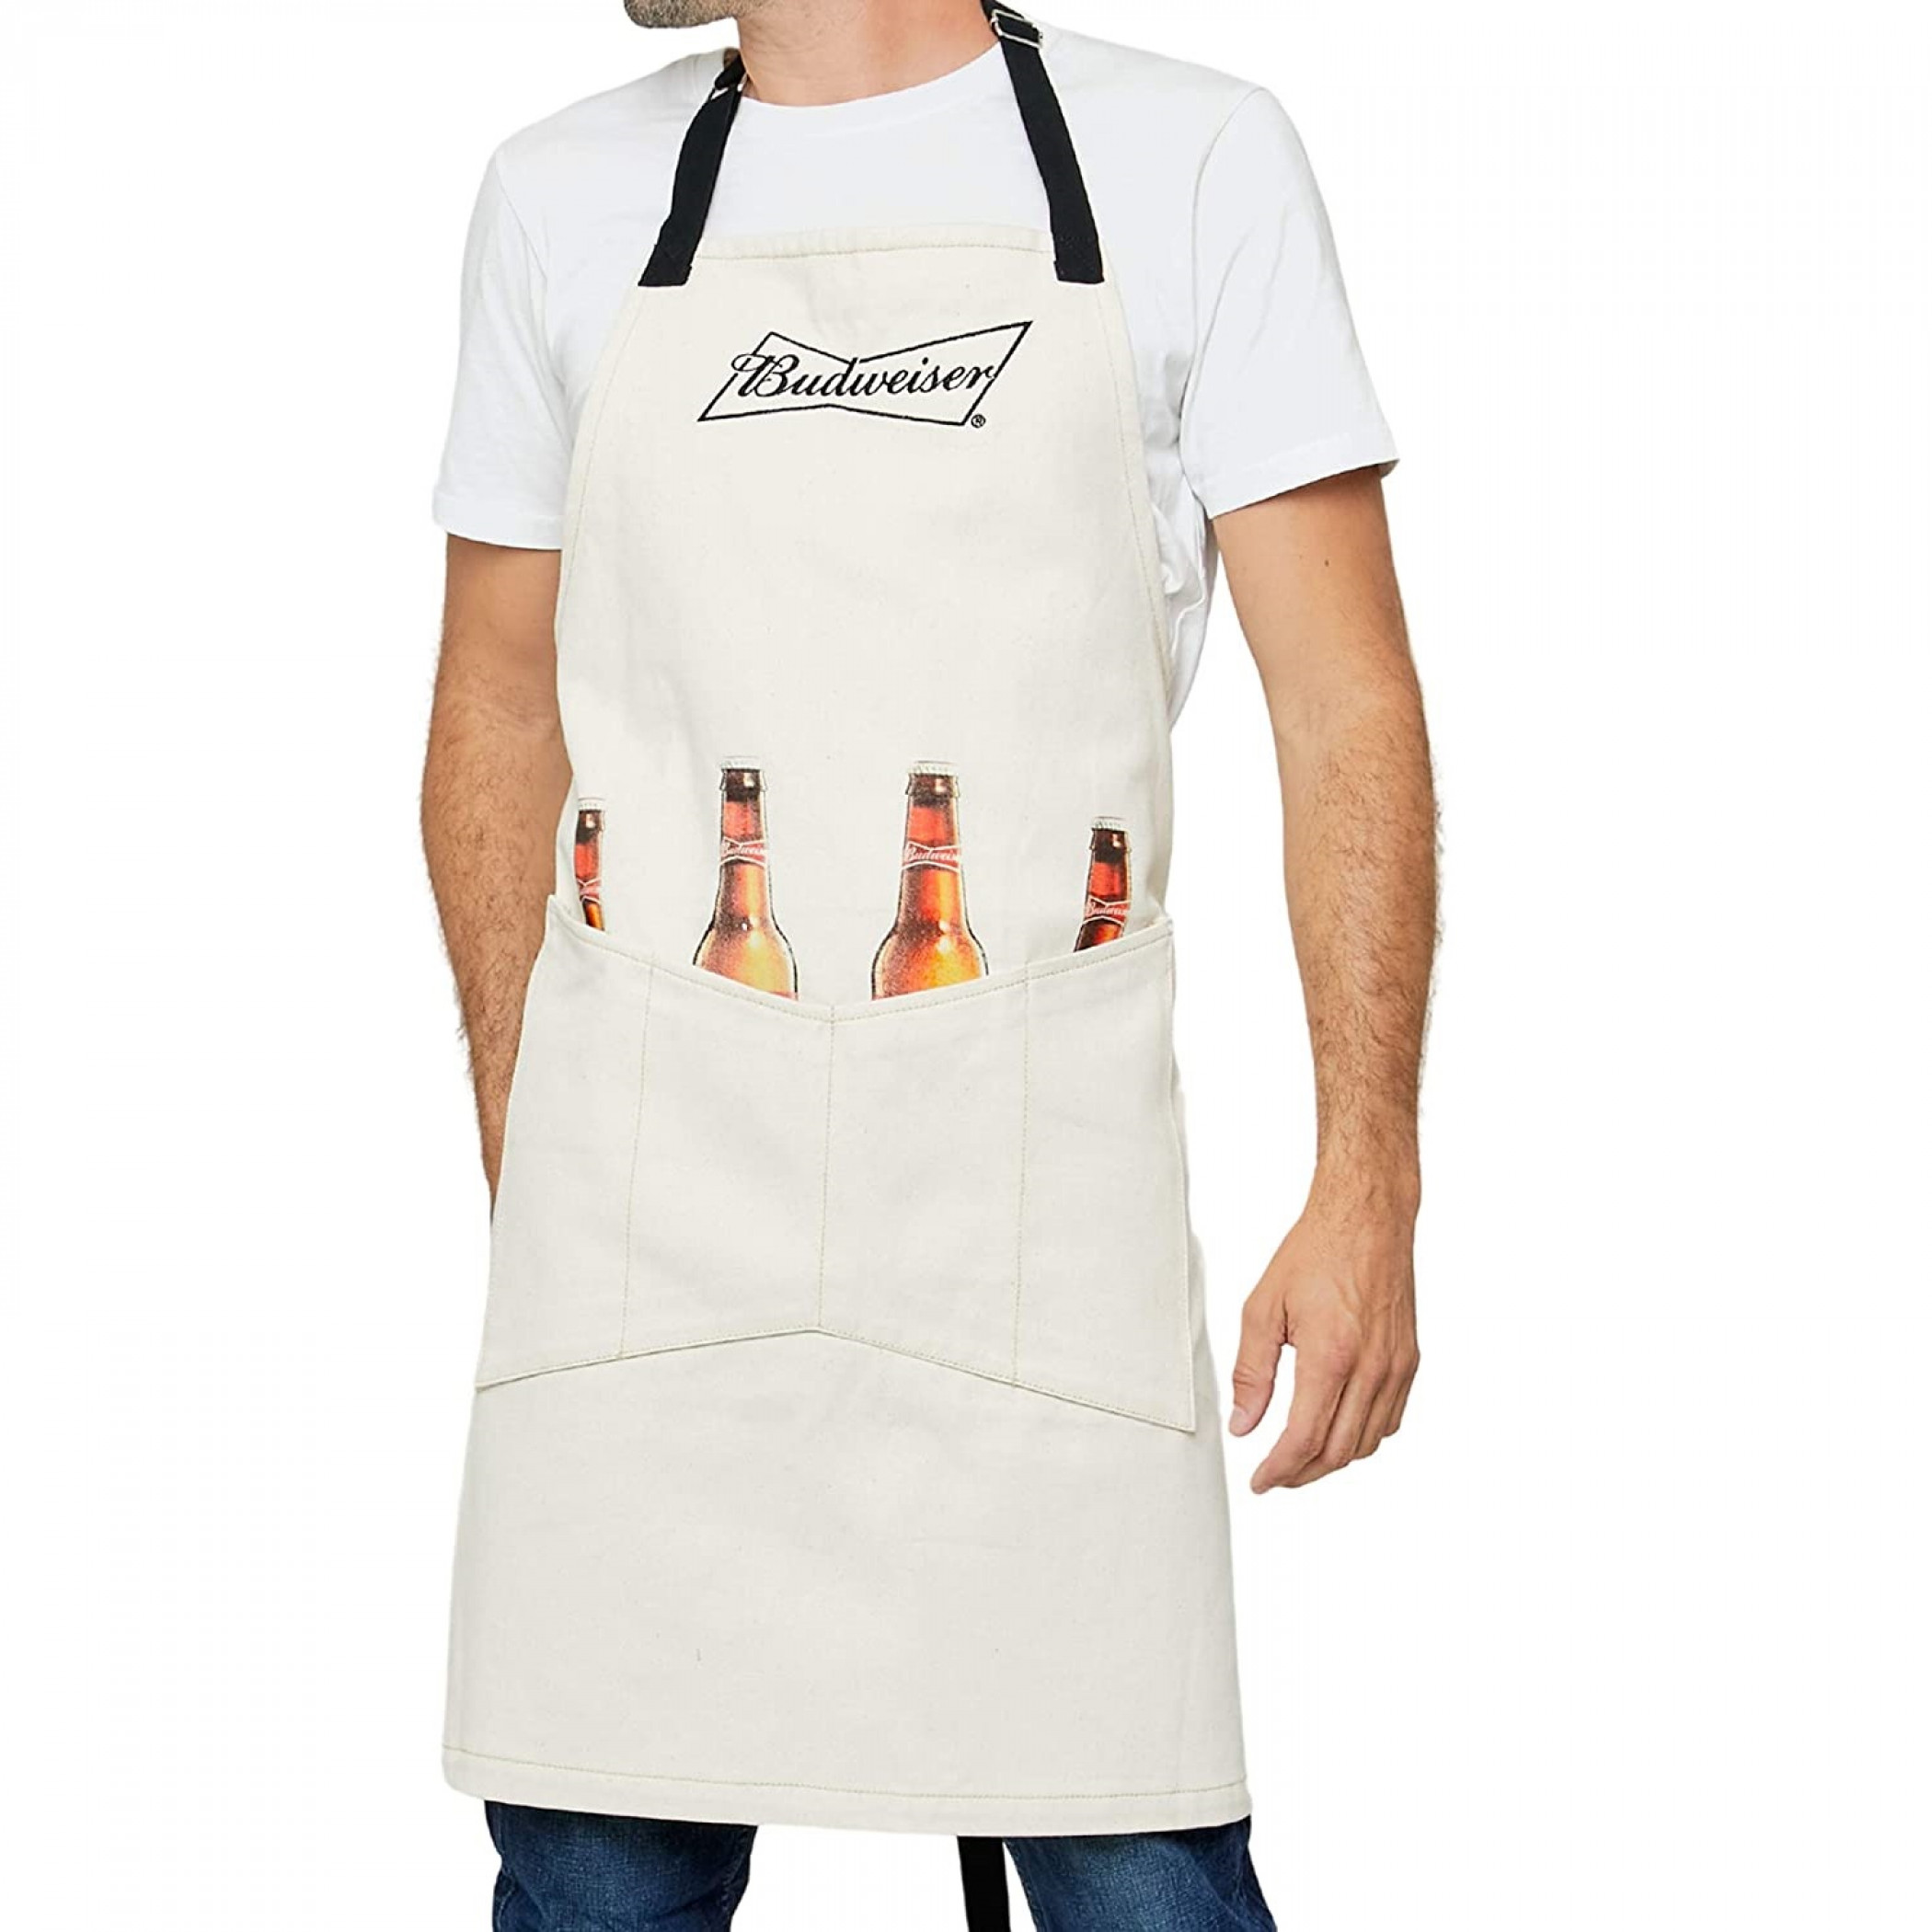 Budweiser King of Beers Grill Master Collection Apron with Pockets